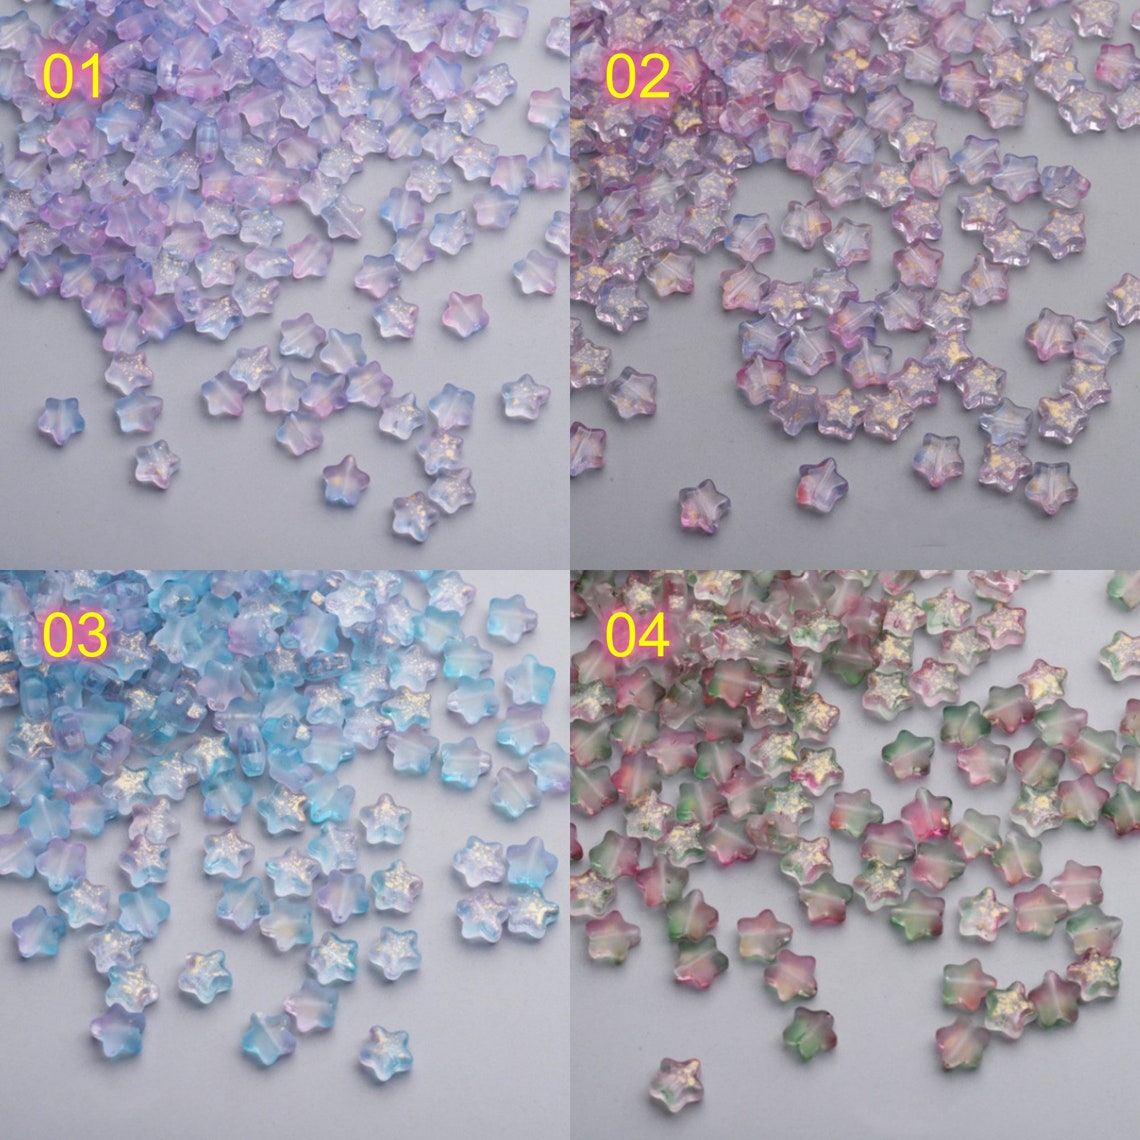 50pcs 8mm Star Czech Glass Loose Spacer Beads Jewelry Making - Etsy